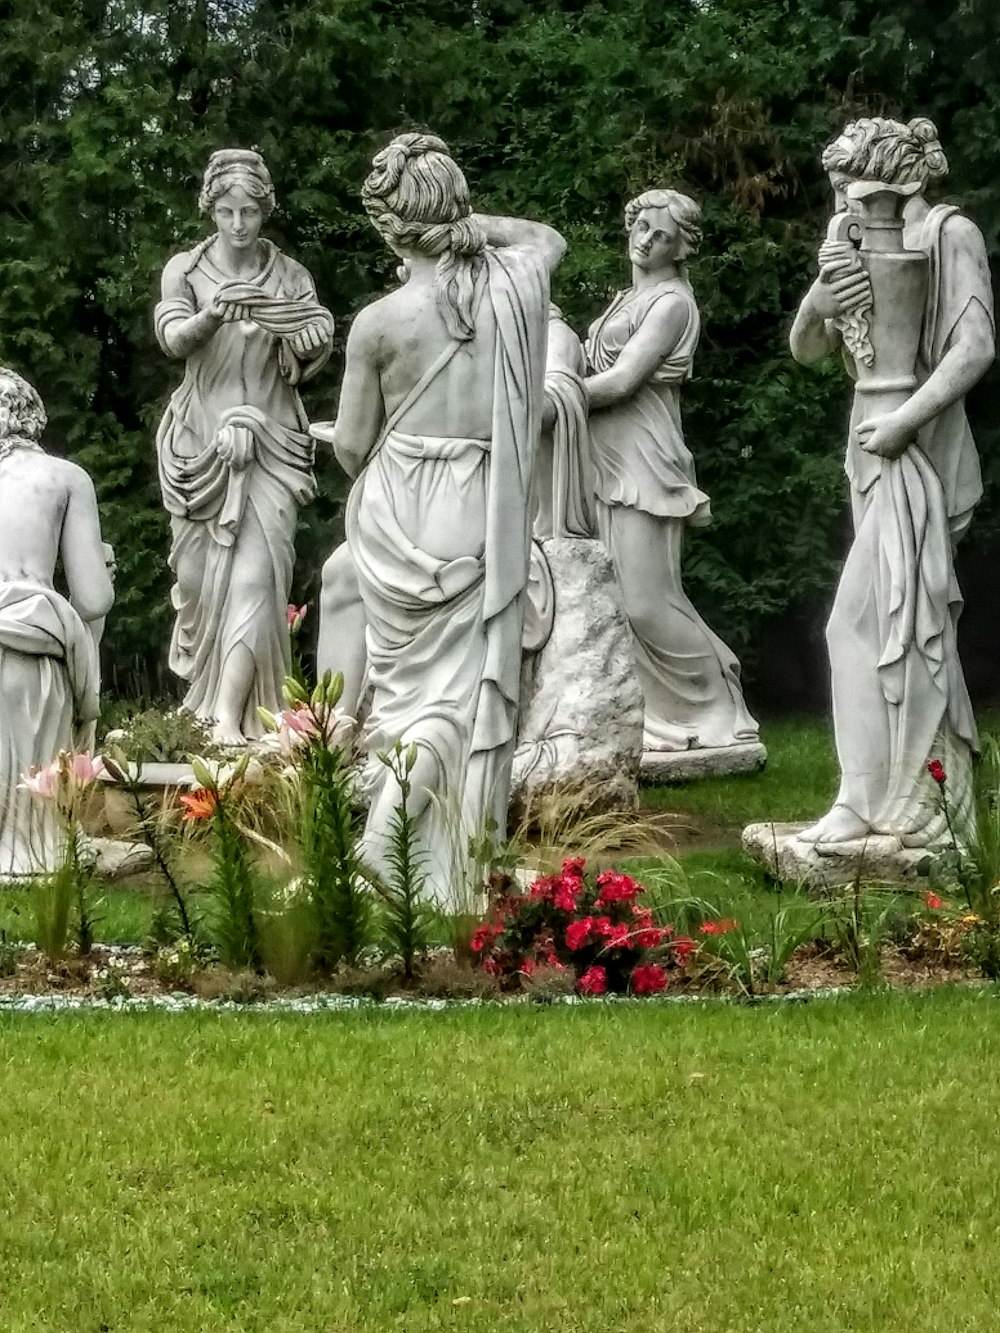 a group of statues in a grassy area